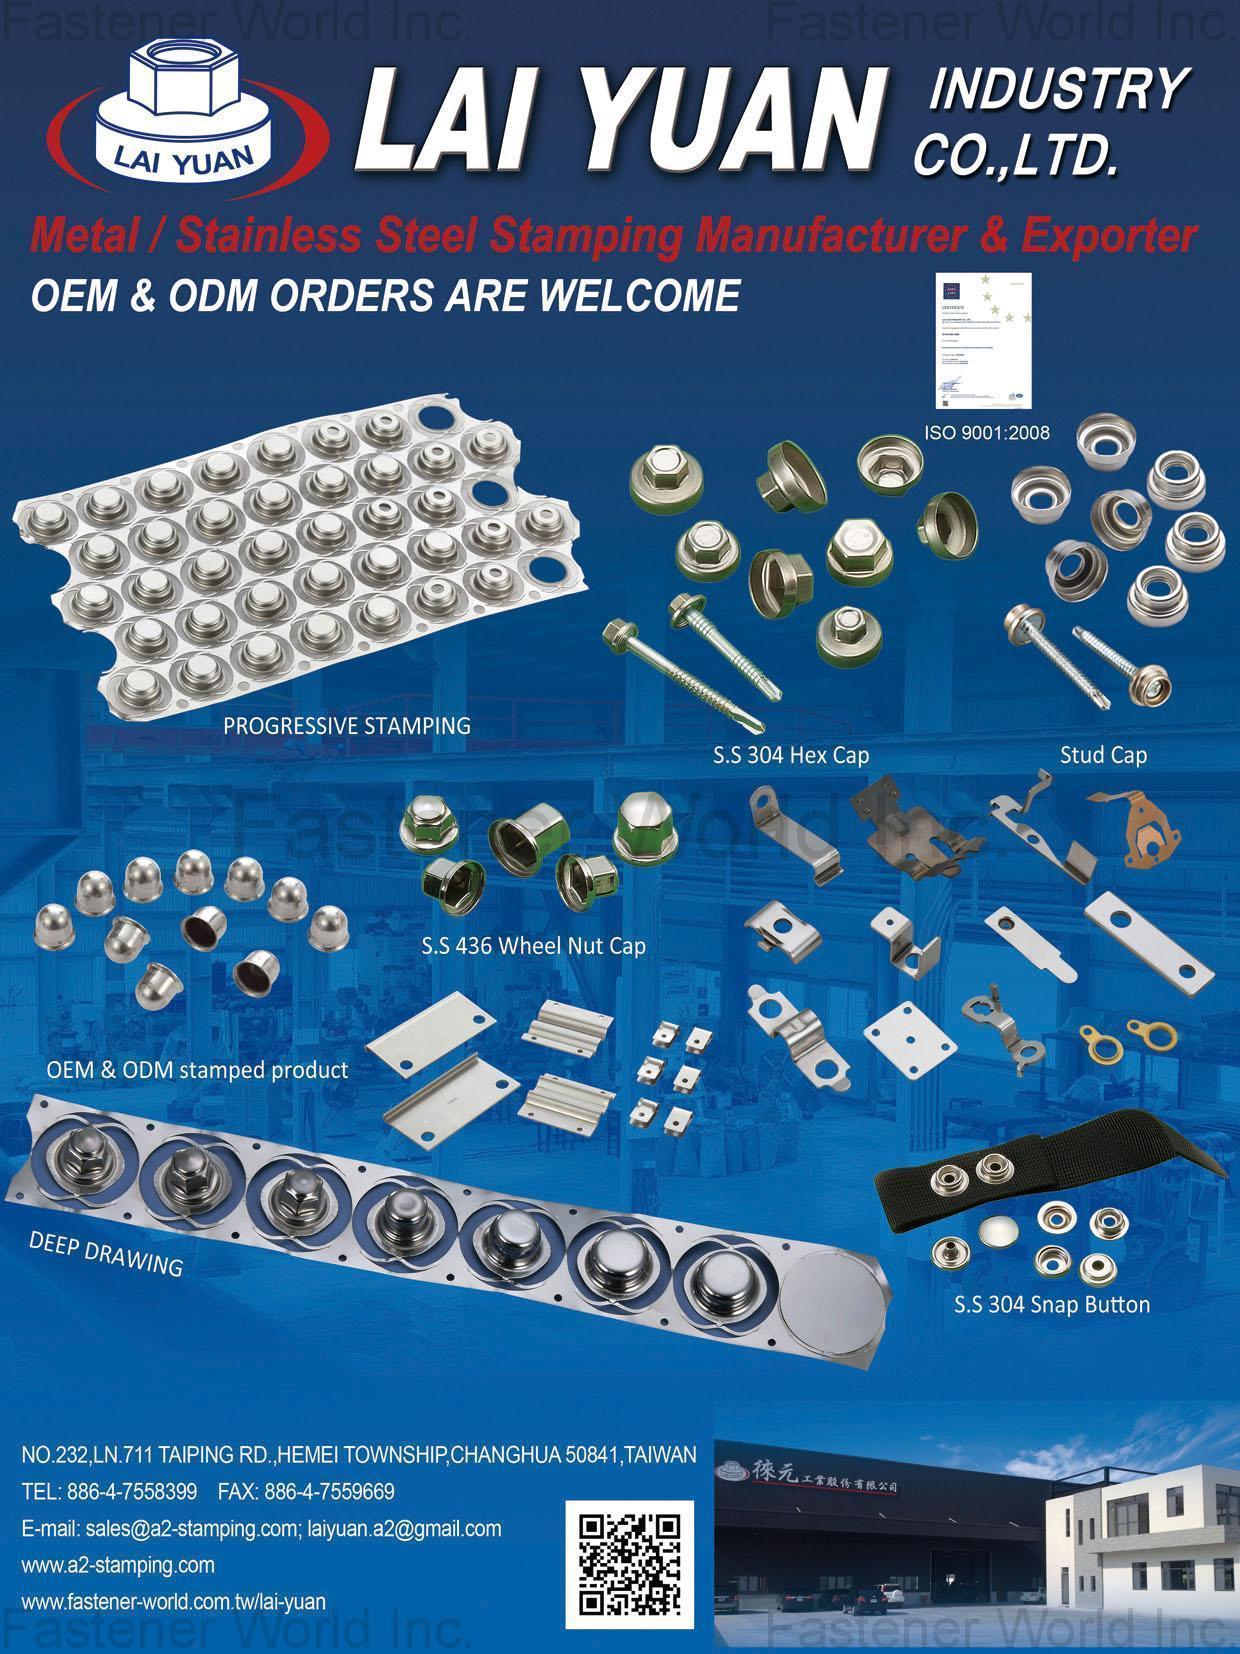 LAI YUAN INDUSTRY CO., LTD.  , Progressive Stamping, Hex Caps, Stud Caps, Wheel Nut Caps, Snap Buttons, Stamped Products , Cap Nuts